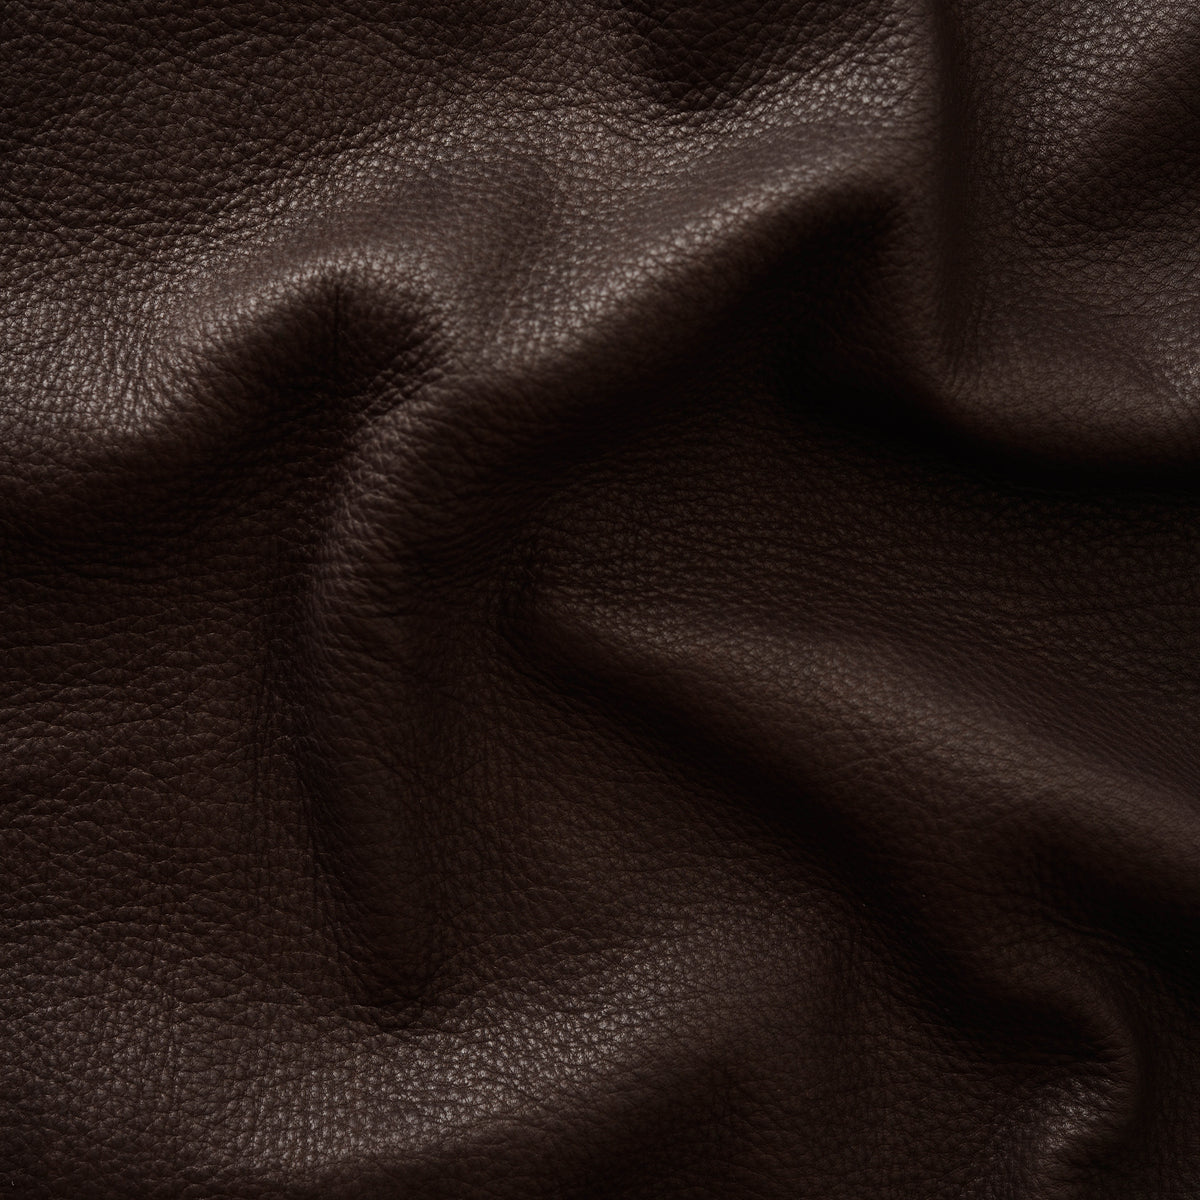 Close-up of Grano Deer leather.